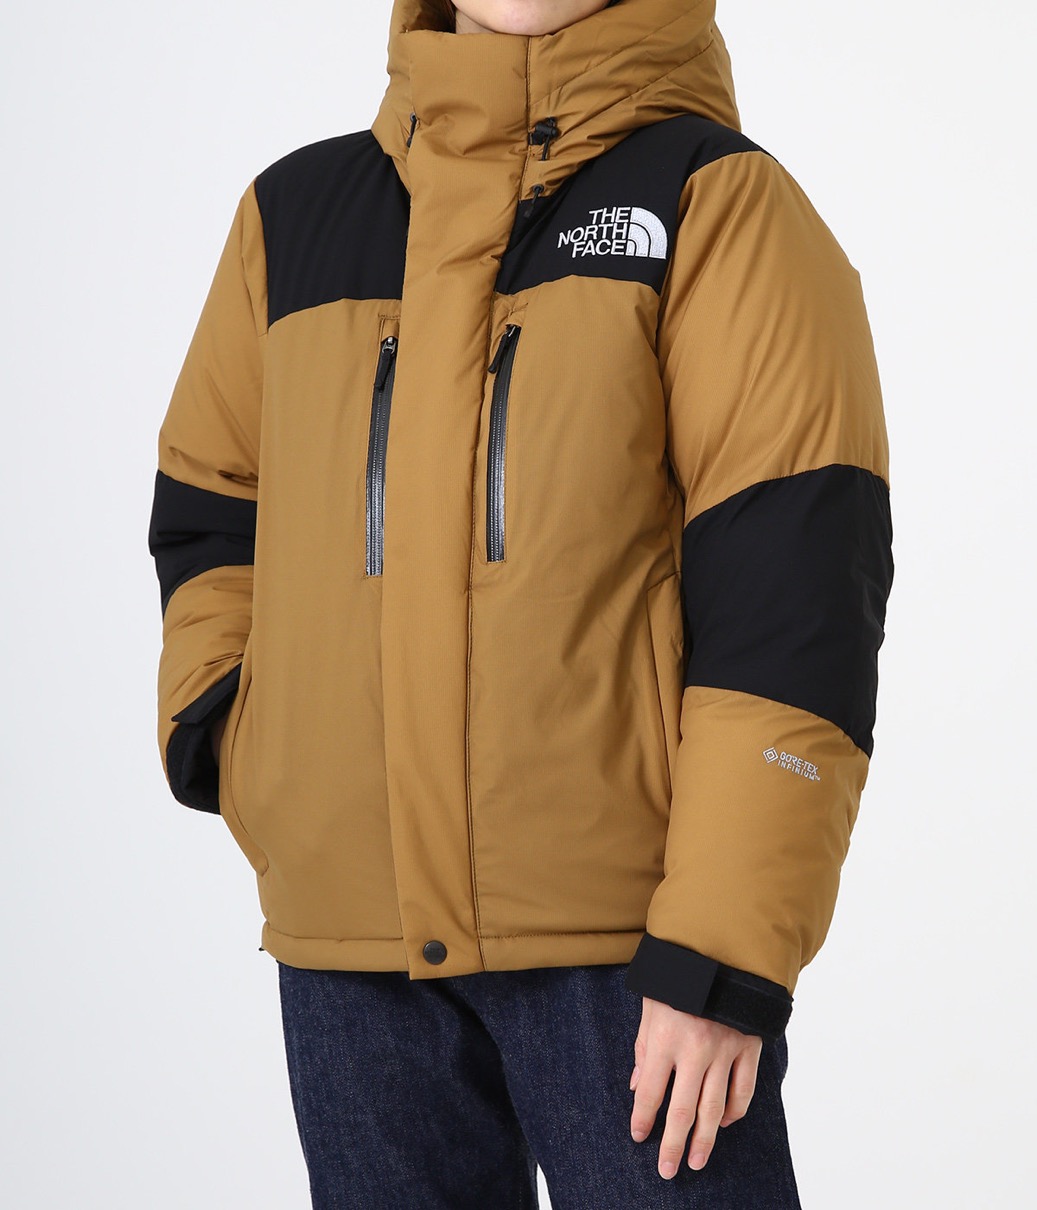 The North Face】2021FW バルトロライトジャケットの発売情報まとめ【予約・販売店舗随時更新中】 | UP TO DATE